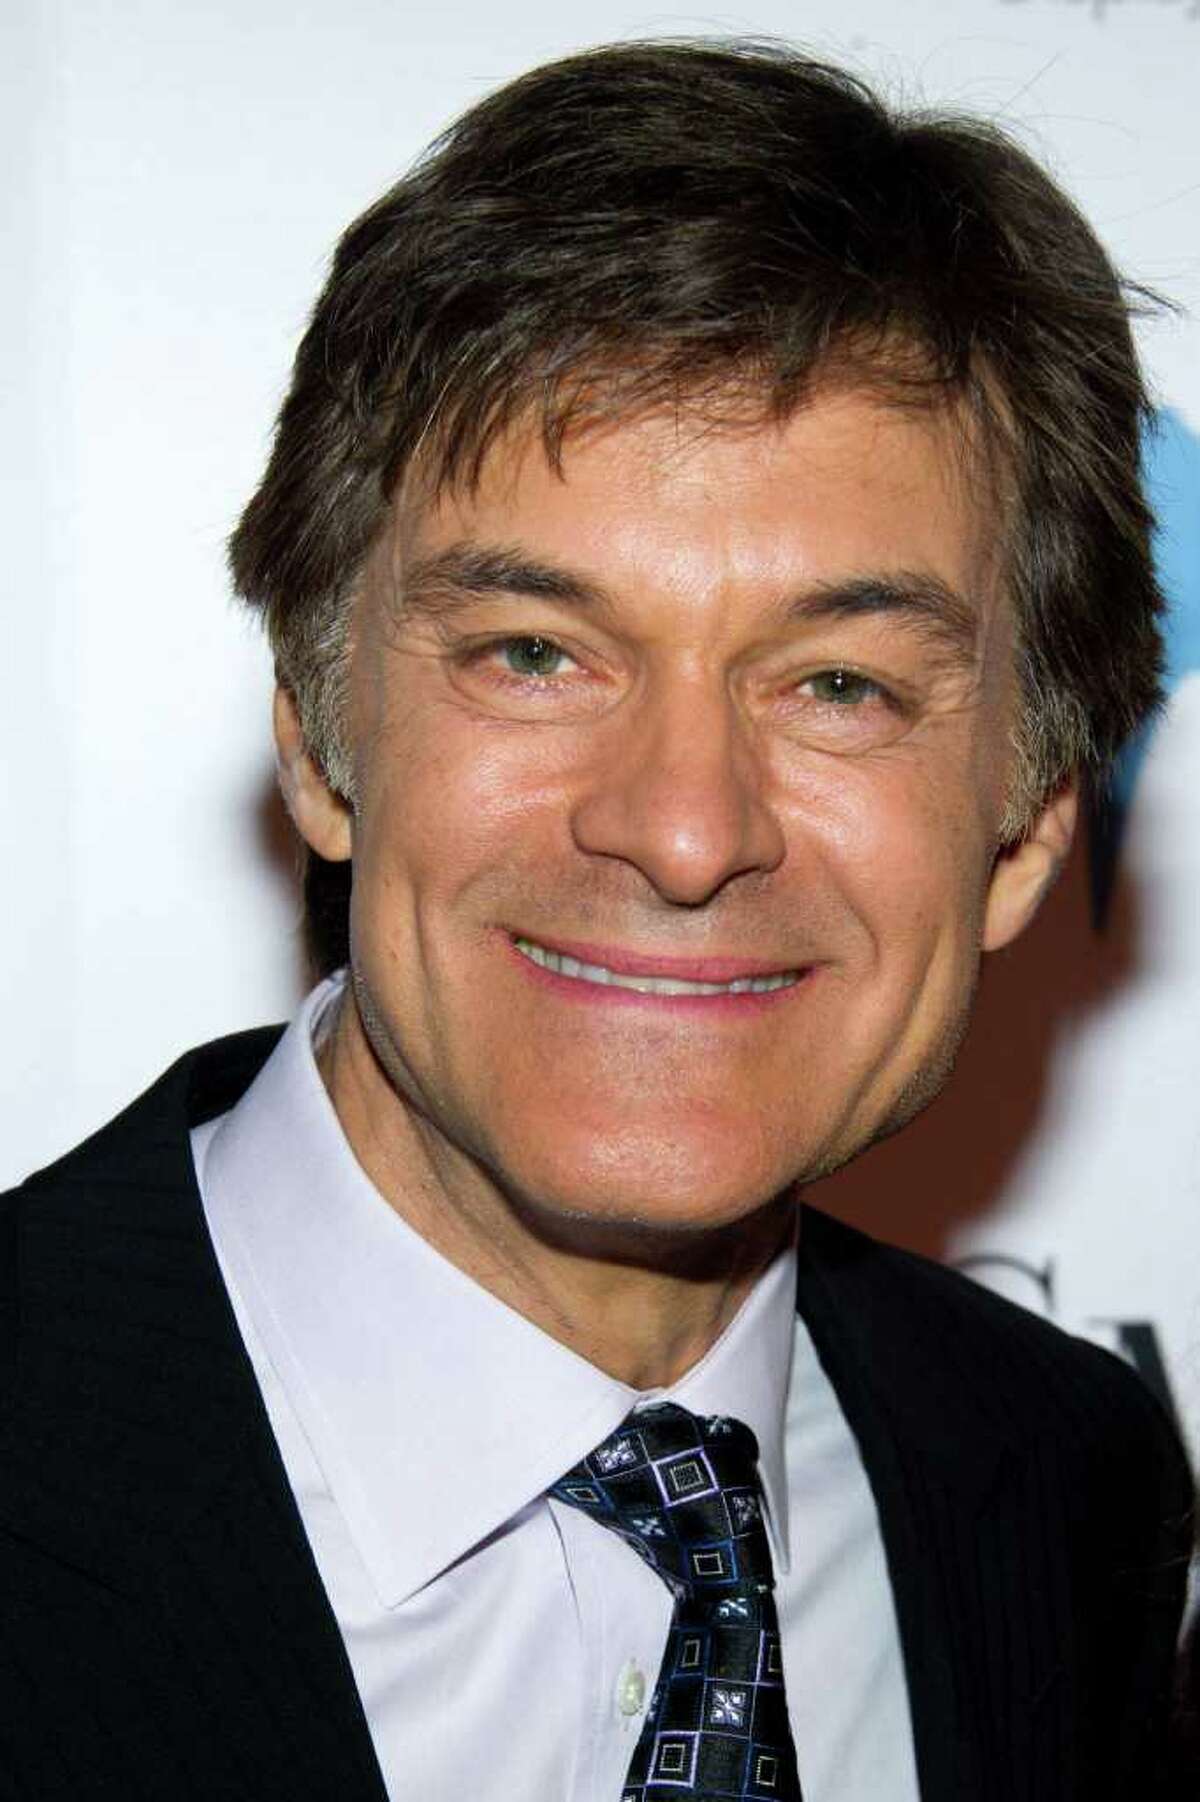 CHARLES SYKES : AP FILE TV HOST: Dr. Mehmet Oz also was scolded by Dr. Richard Besser, former acting head of the Centers for Disease Control and Prevention, for his program's "irresponsible" report.